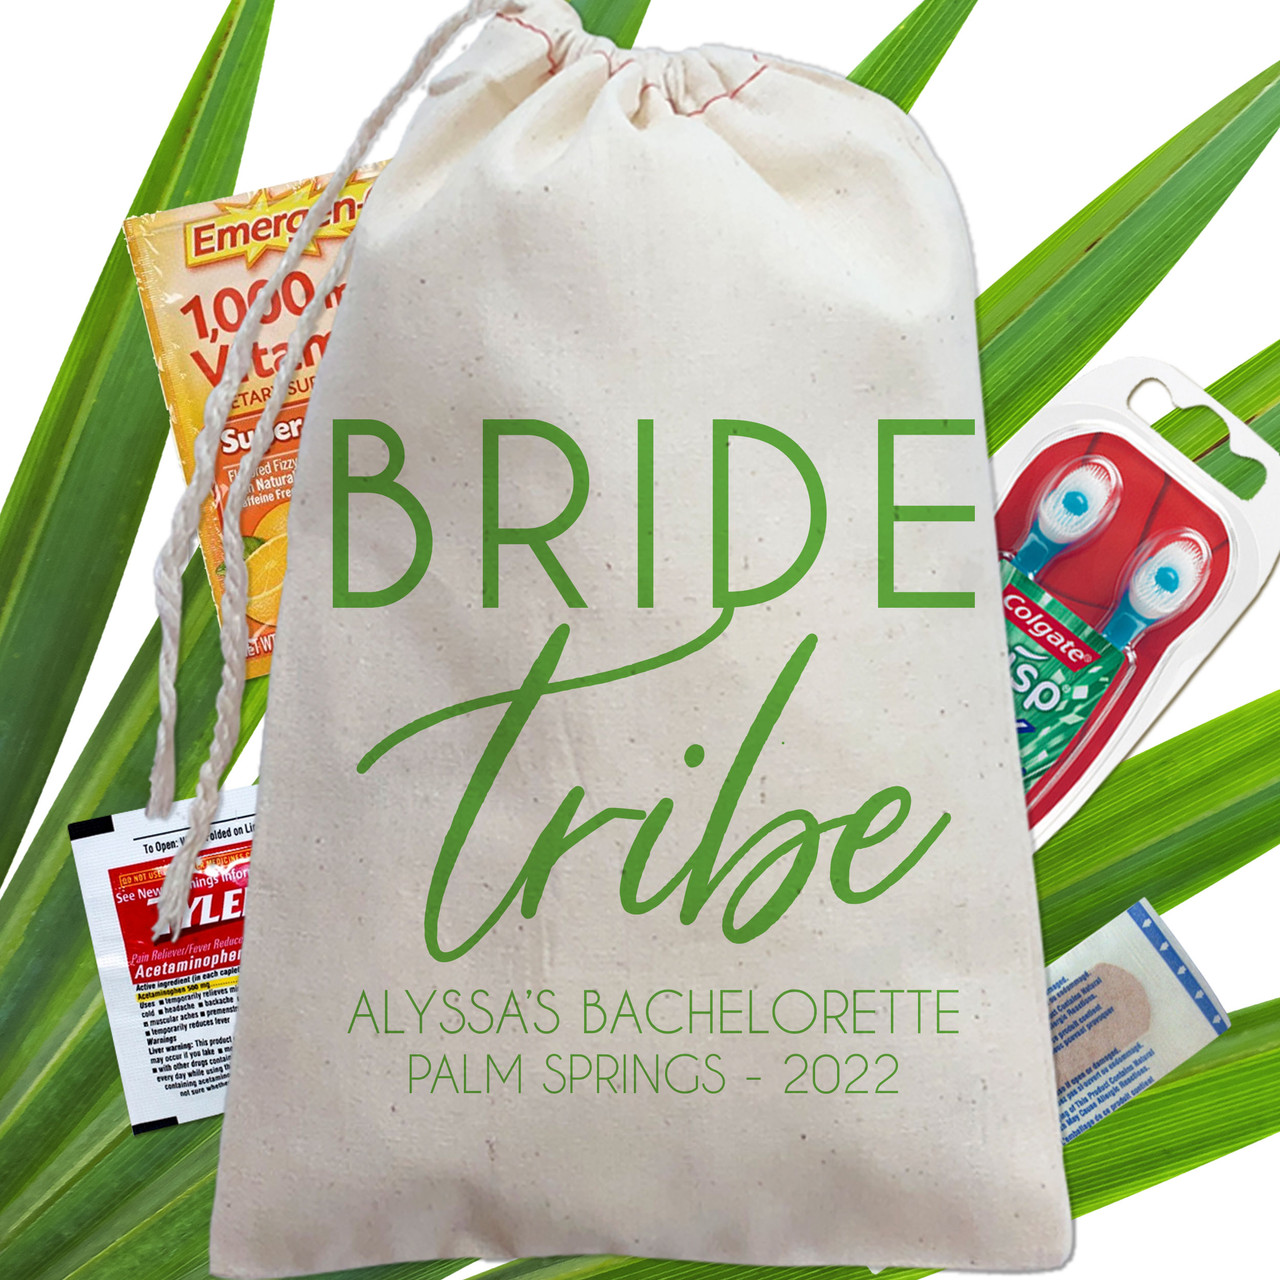 https://cdn11.bigcommerce.com/s-5grzuu6/images/stencil/1280x1280/products/6003/45823/Modern_Bride-Tribe-Personalized_Gift-Bags_Green__98628.1644267799.jpg?c=2